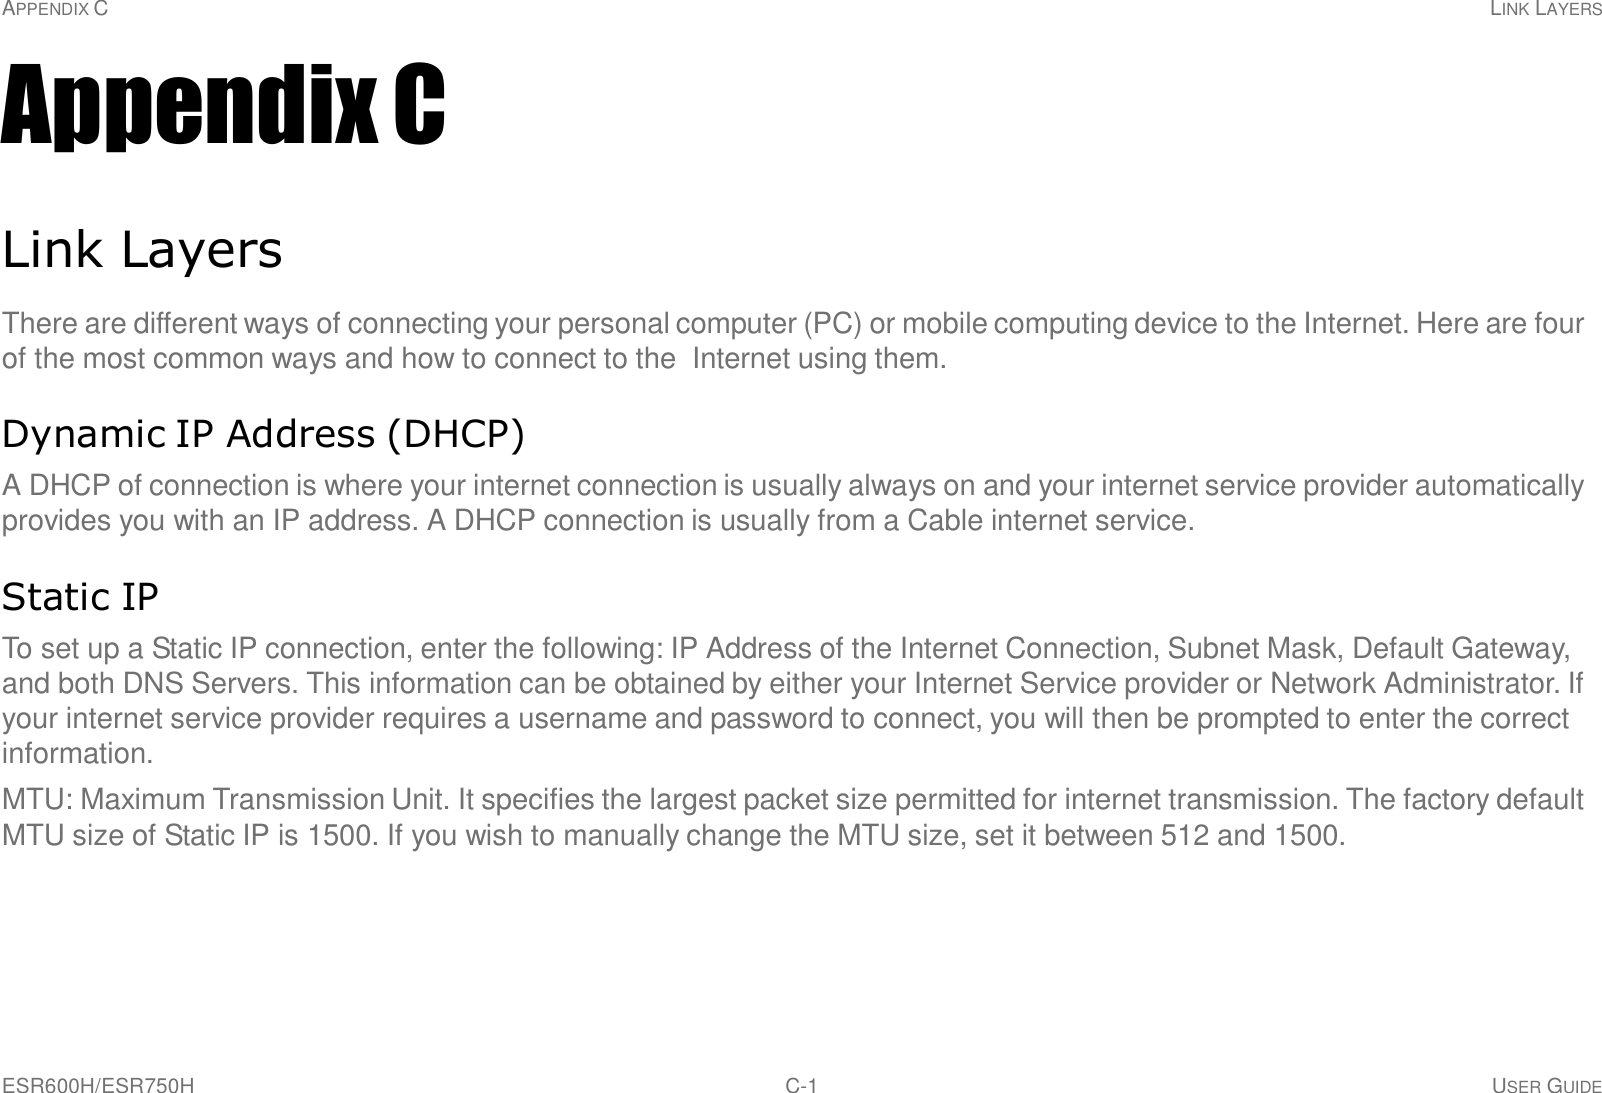 APPENDIX C LINK LAYERS ESR600H/ESR750H C-1 USER GUIDE     Appendix C   Link Layers  There are different ways of connecting your personal computer (PC) or mobile computing device to the Internet. Here are four of the most common ways and how to connect to the  Internet using them.   Dynamic IP Address (DHCP)  A DHCP of connection is where your internet connection is usually always on and your internet service provider automatically provides you with an IP address. A DHCP connection is usually from a Cable internet service.   Static IP  To set up a Static IP connection, enter the following: IP Address of the Internet Connection, Subnet Mask, Default Gateway, and both DNS Servers. This information can be obtained by either your Internet Service provider or Network Administrator. If your internet service provider requires a username and password to connect, you will then be prompted to enter the correct information.  MTU: Maximum Transmission Unit. It specifies the largest packet size permitted for internet transmission. The factory default MTU size of Static IP is 1500. If you wish to manually change the MTU size, set it between 512 and 1500. 